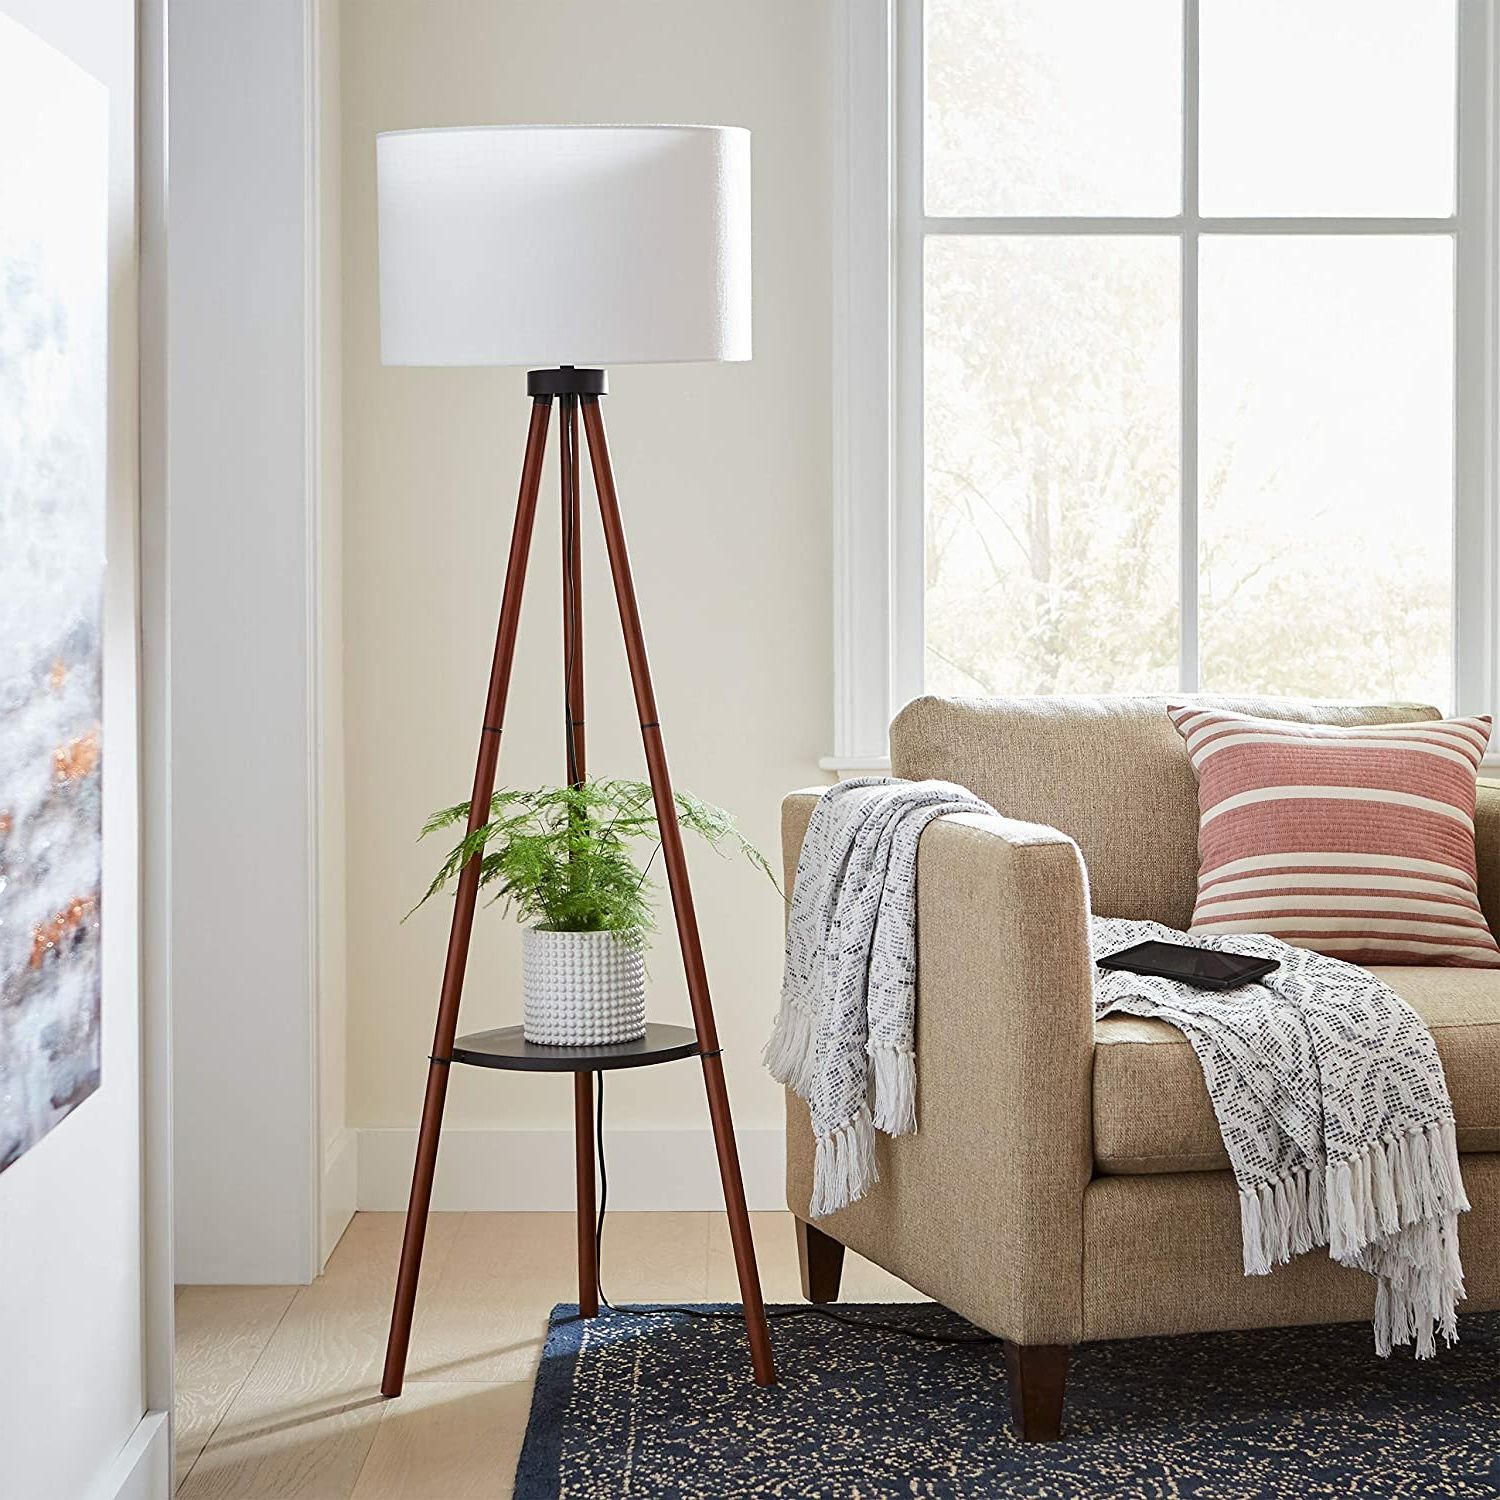 Favorite George Oliver Asberry 61" Led Tripod Floor Lamp & Reviews (View 10 of 15)